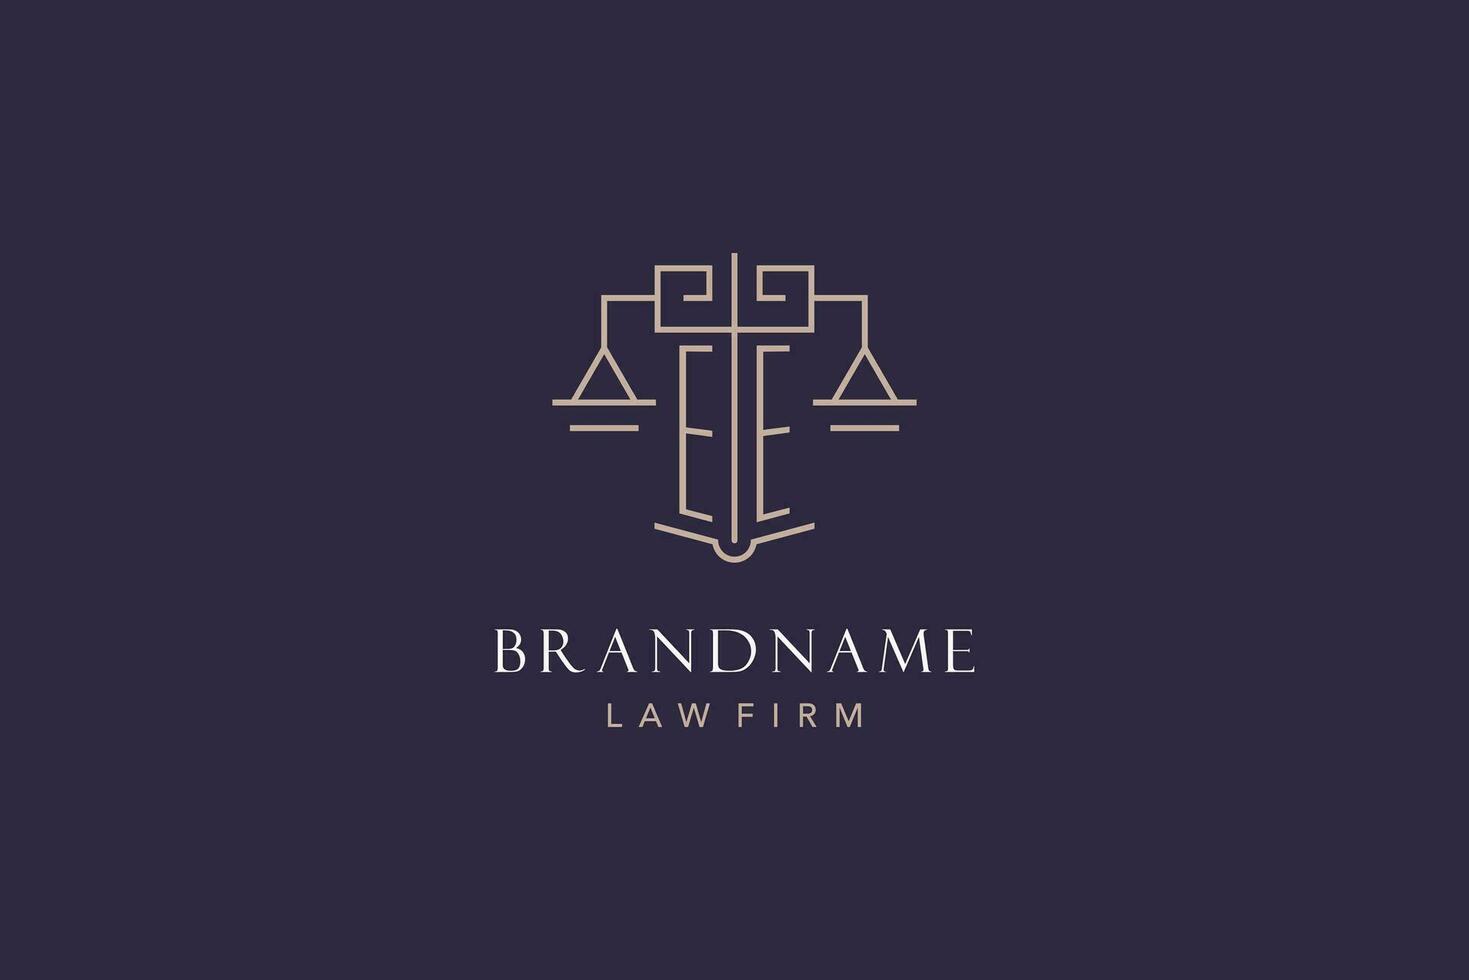 Initial letter EE logo with scale of justice logo design, luxury legal logo geometric style vector